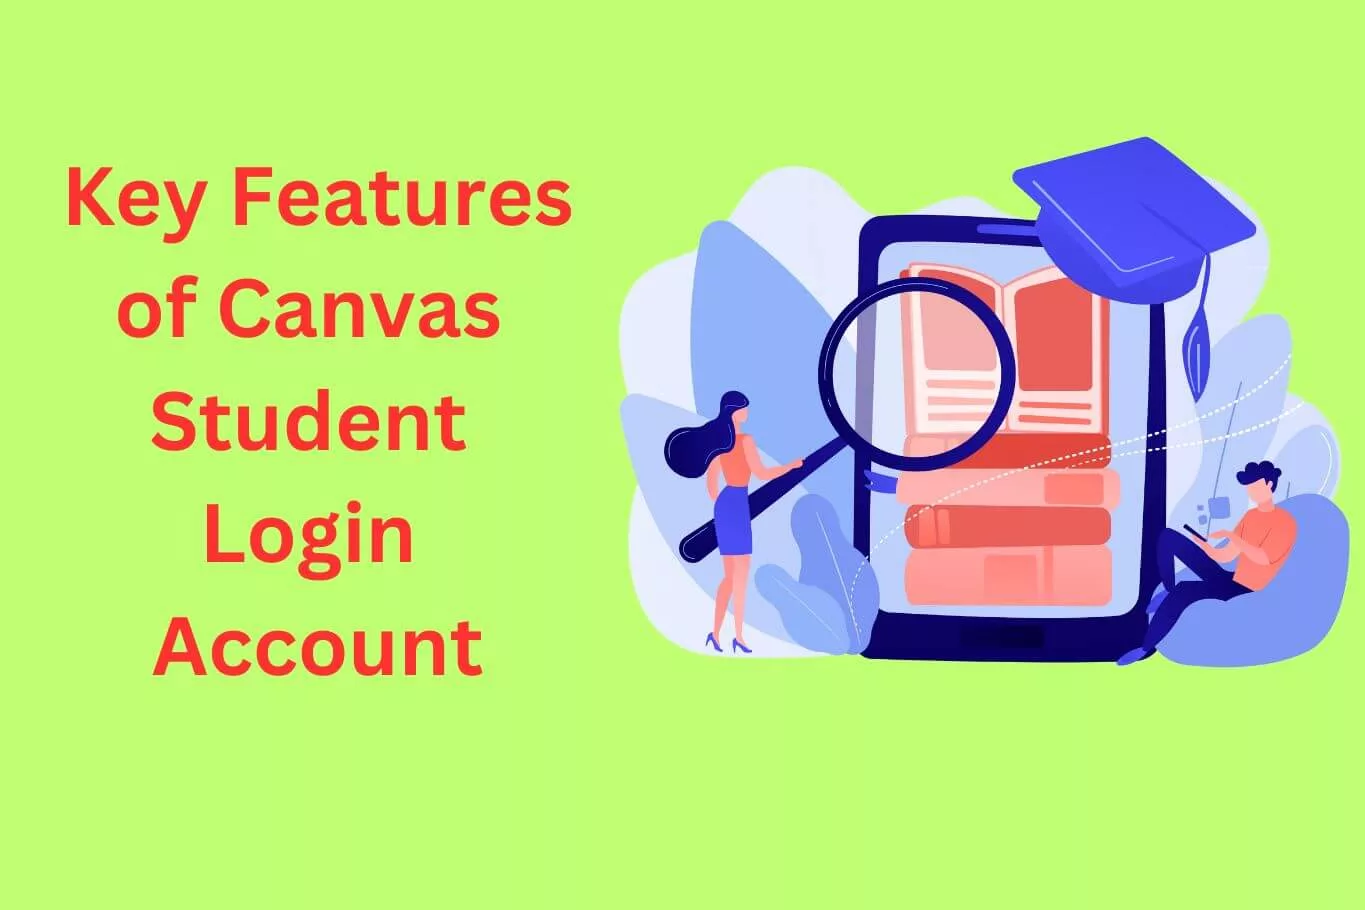 Key Features of Canvas Student Login Account